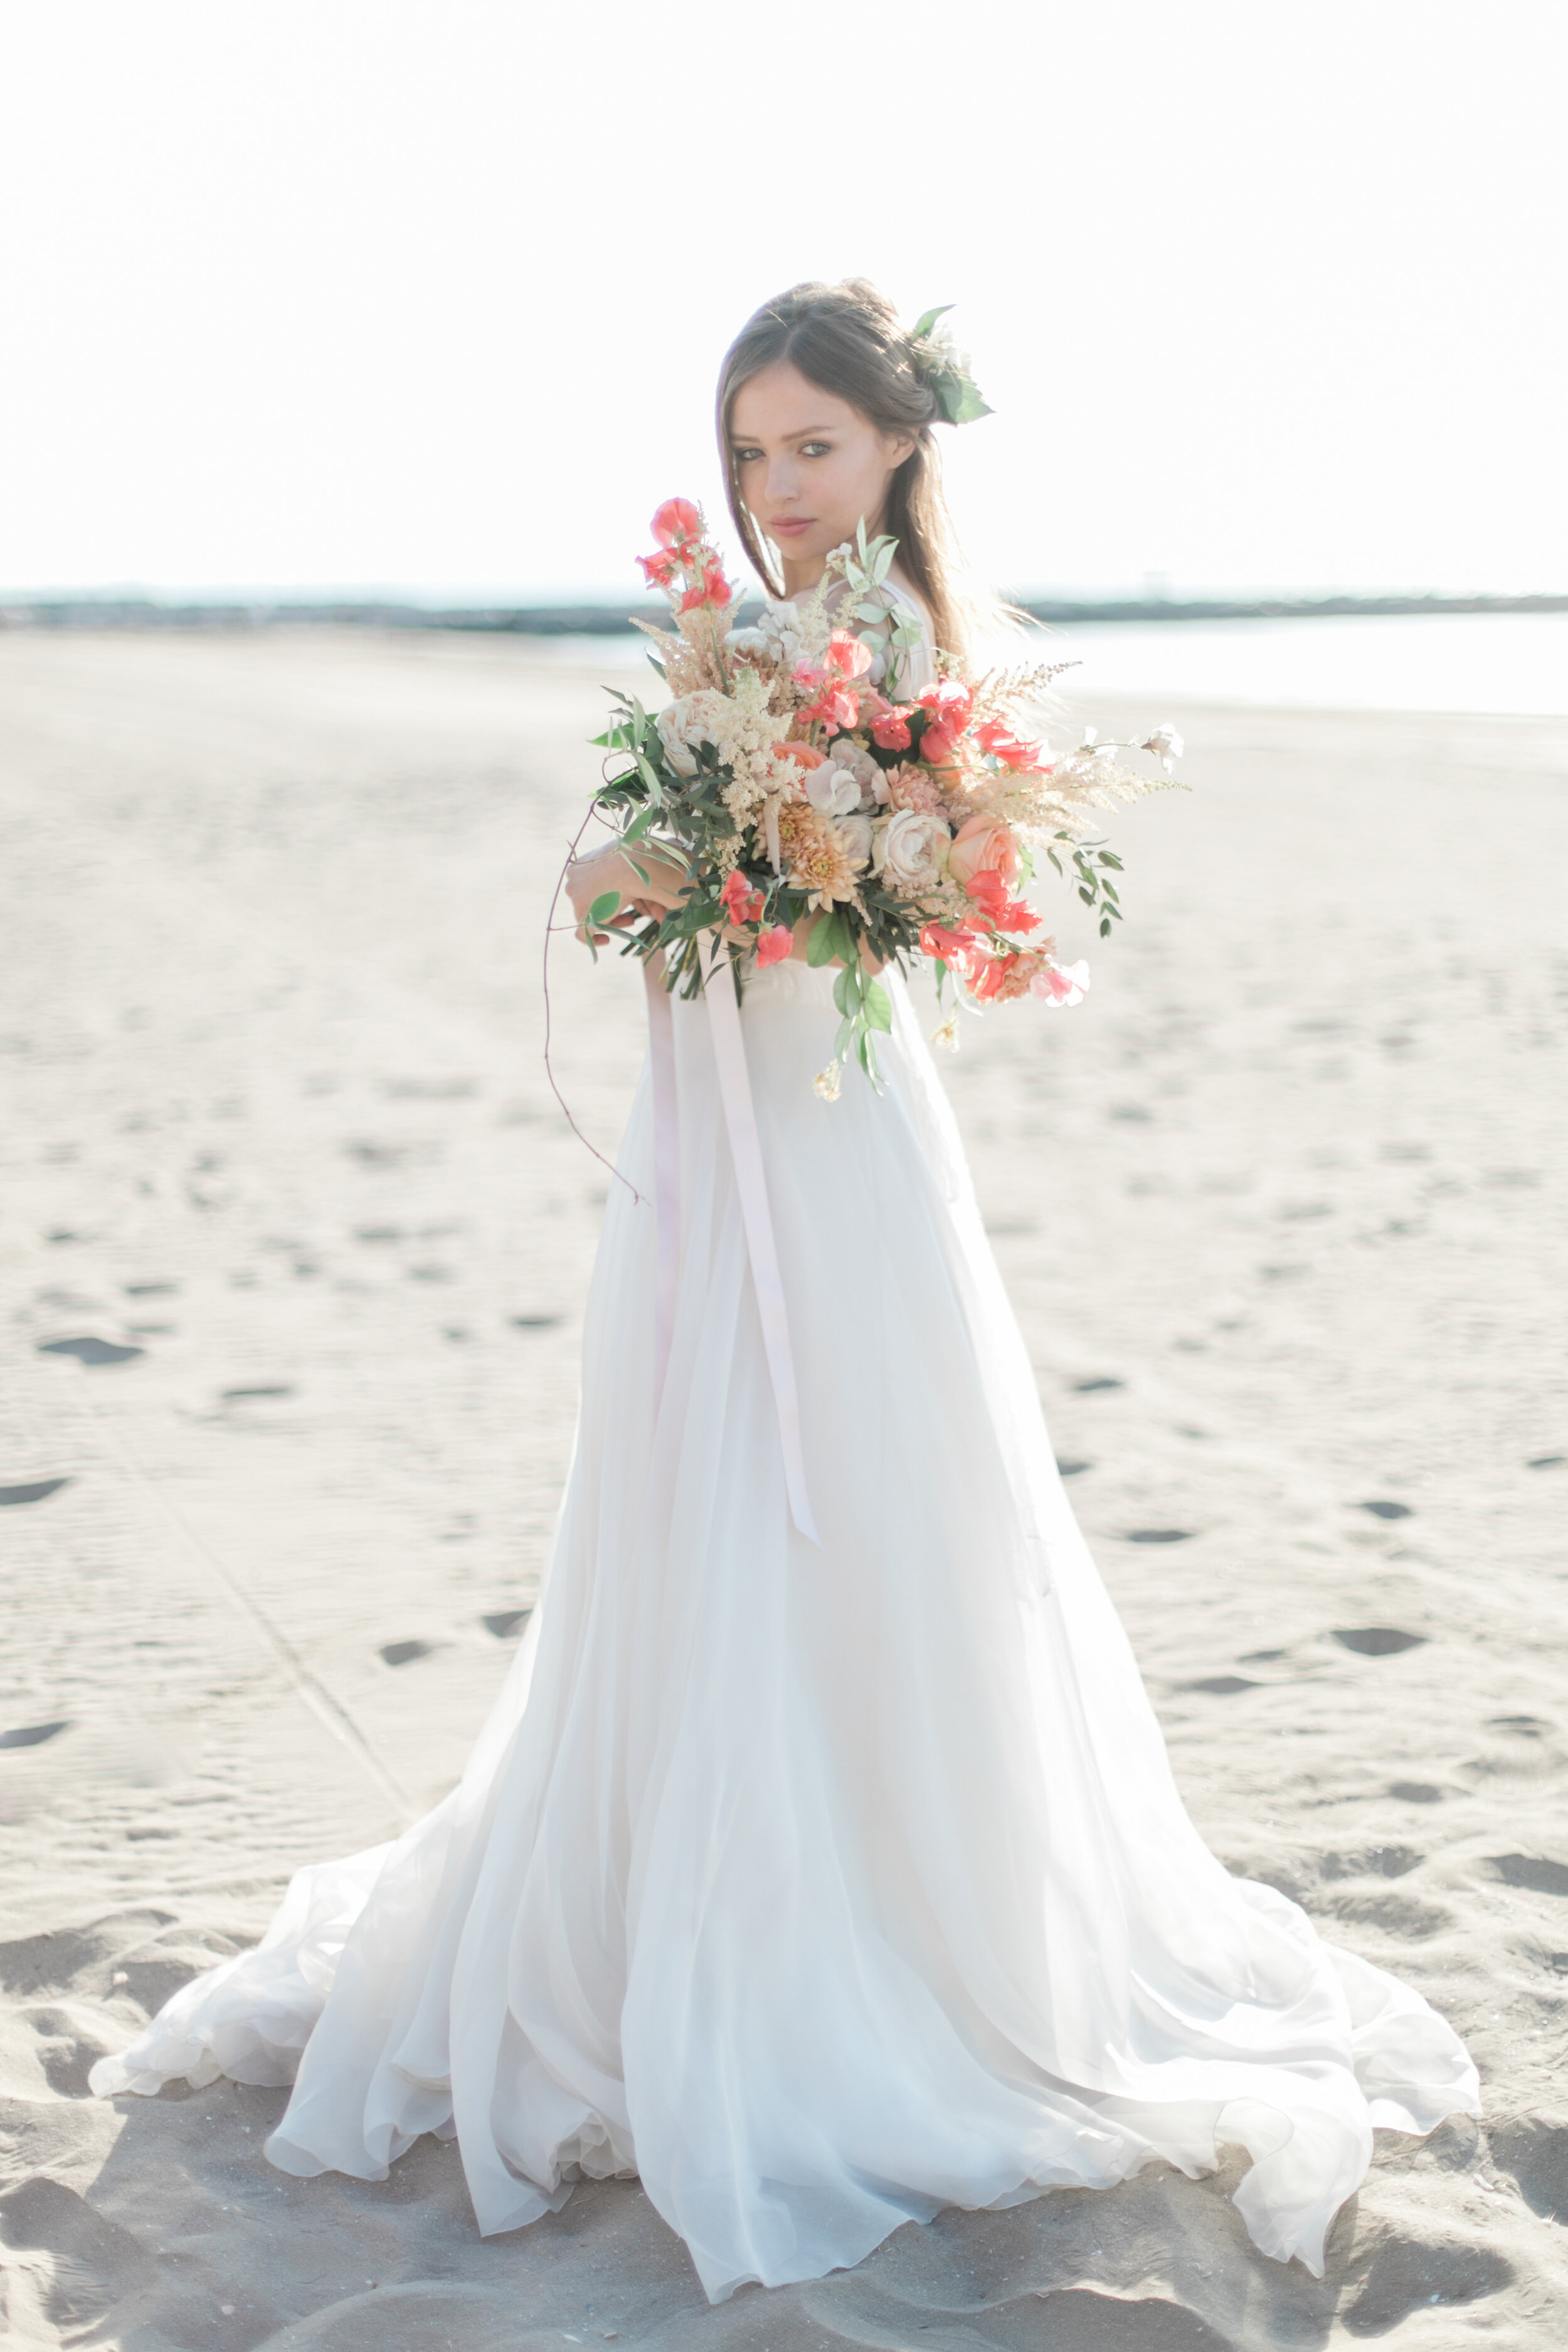 Delicate Bridal Session on the beach of Venice - Maddy Christina (25 sur 80).jpg